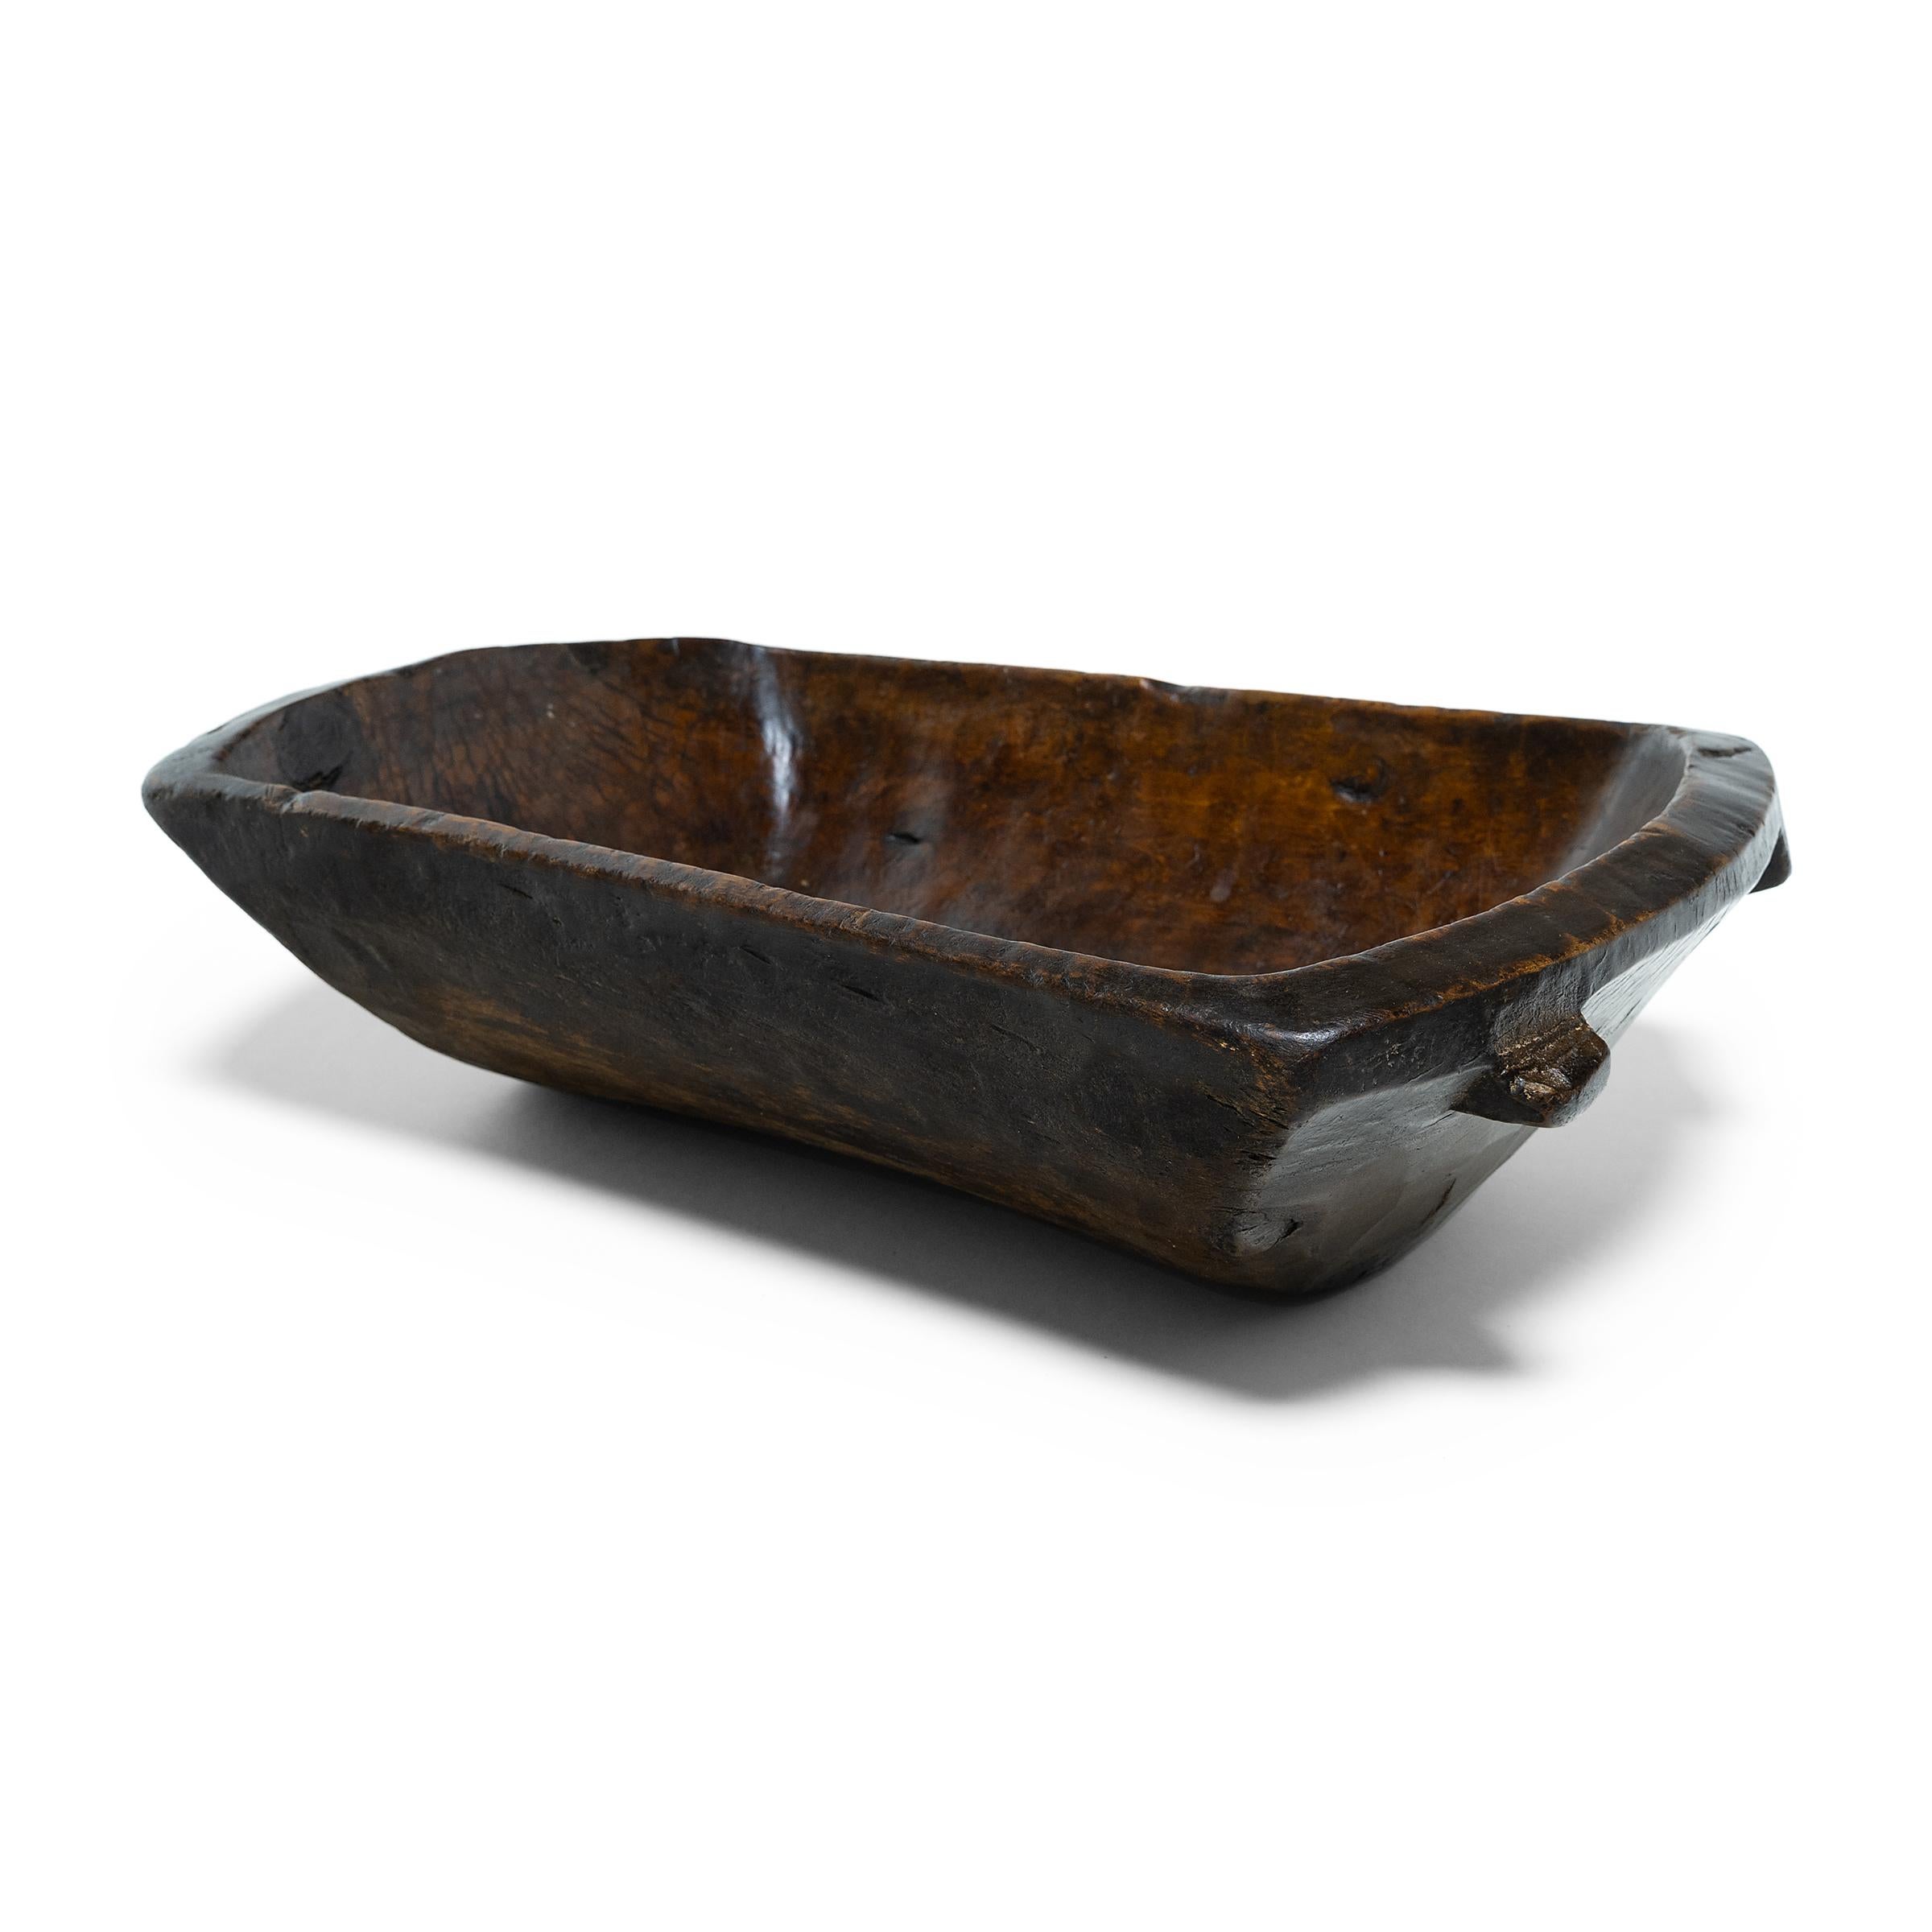 This early-20th century wooden tray from northern China charms with rustic texture and asymmetric form. Hand-carved from a single block of wood, the tray has a rectangular shape with rounded corners and tapered sides that flatten out at the rim.